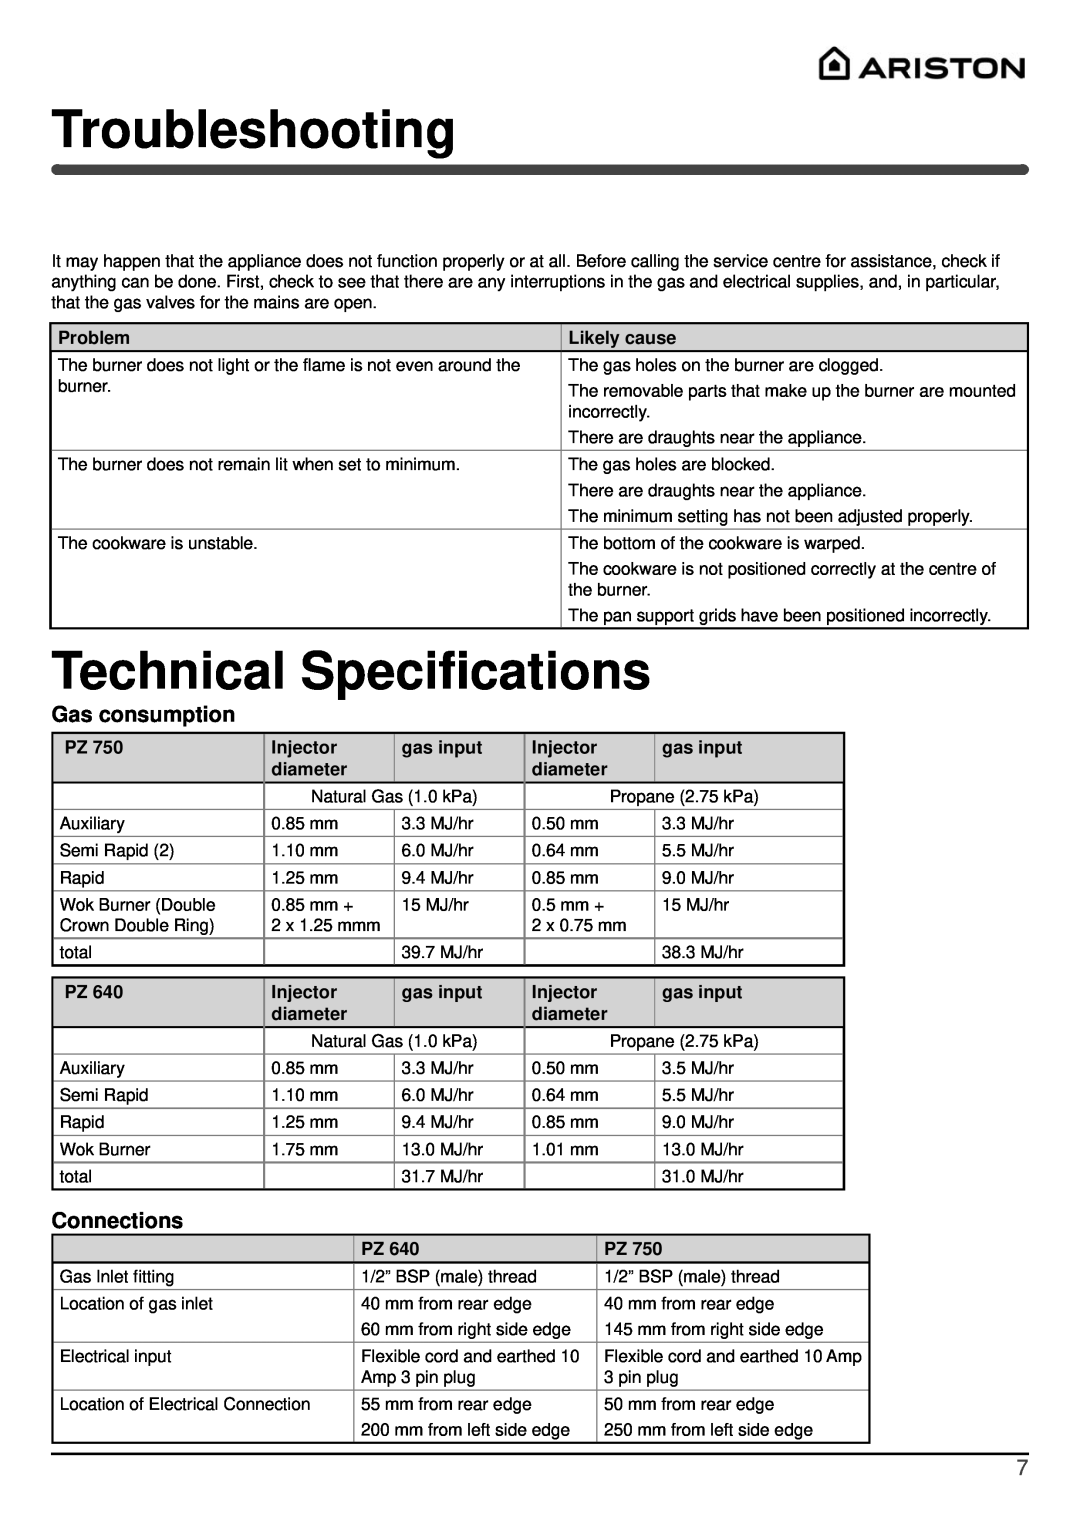 Indesit PZ 750R GH NG, PZ 640T GH NG Troubleshooting, Technical Speciﬁcations, Gas consumption, Connections 